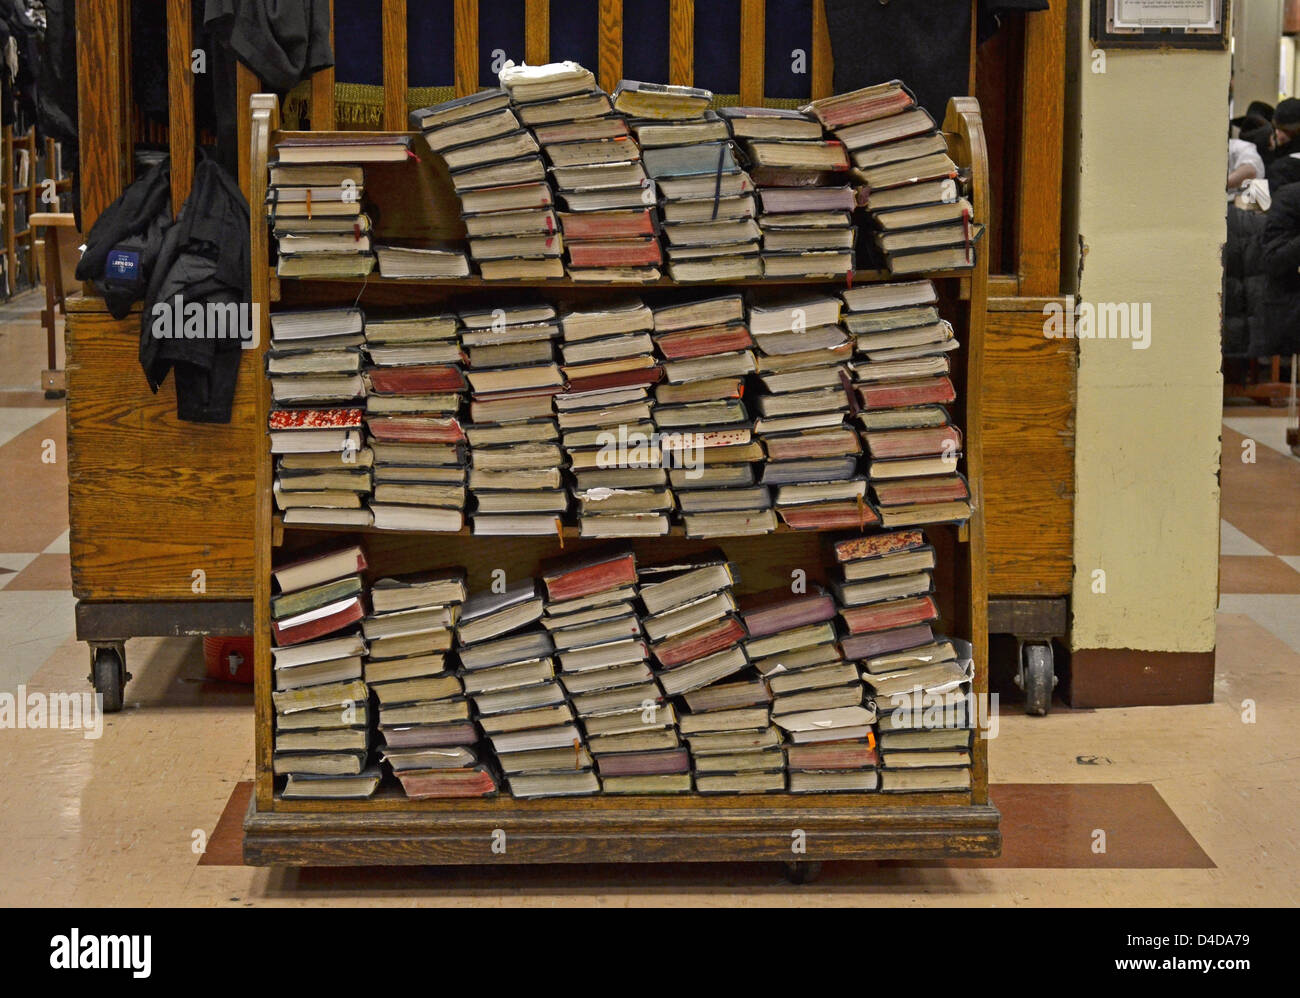 Pile of religious books and prayer books at Lubavitch headquarters in Crown Heights, Brookly, New York Stock Photo